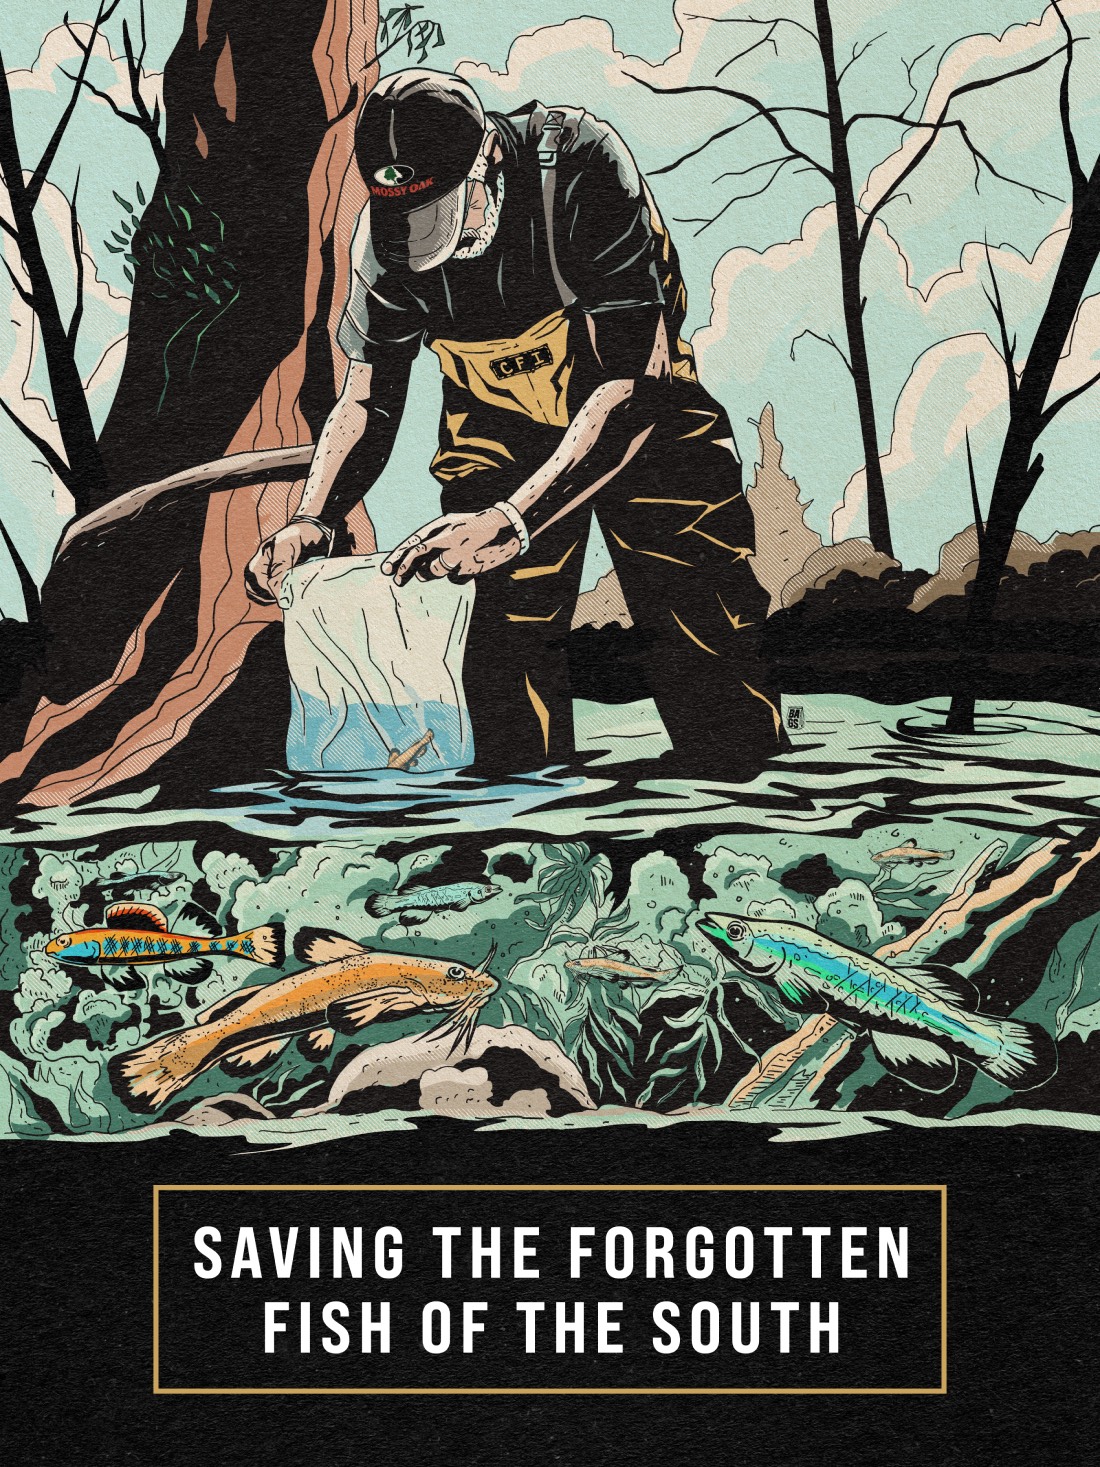 graphic of a man releasing fish with the title "saving the forgotten fish of the south"